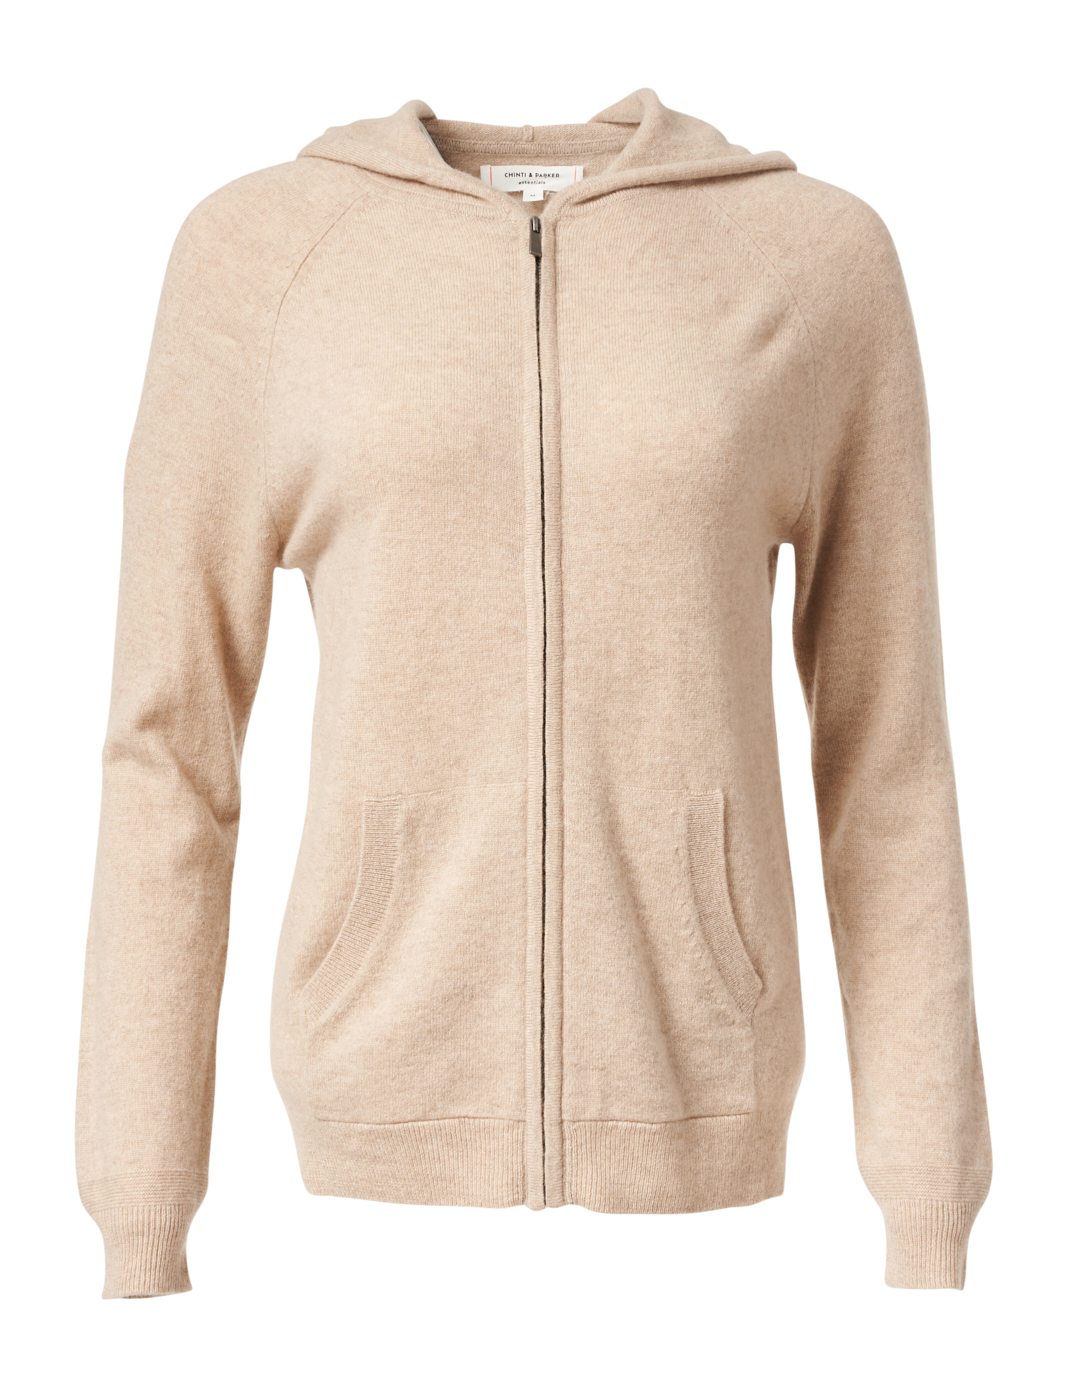 Oatmeal Beige Cashmere Zip Up Hoodie | Chinti and Parker